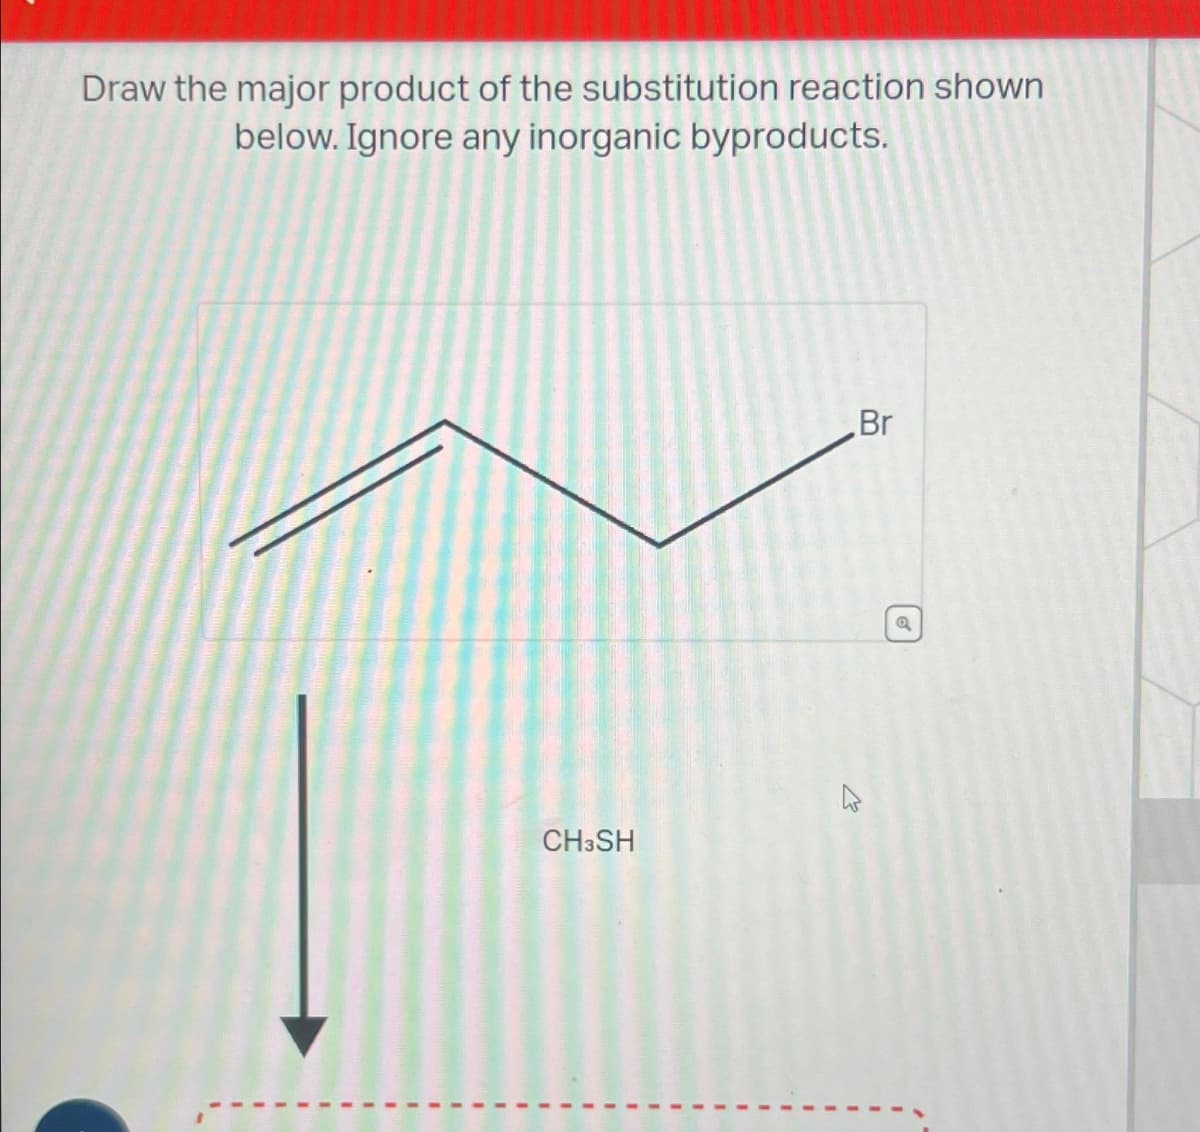 Draw the major product of the substitution reaction shown
below. Ignore any inorganic byproducts.
CH3SH
Br
Q